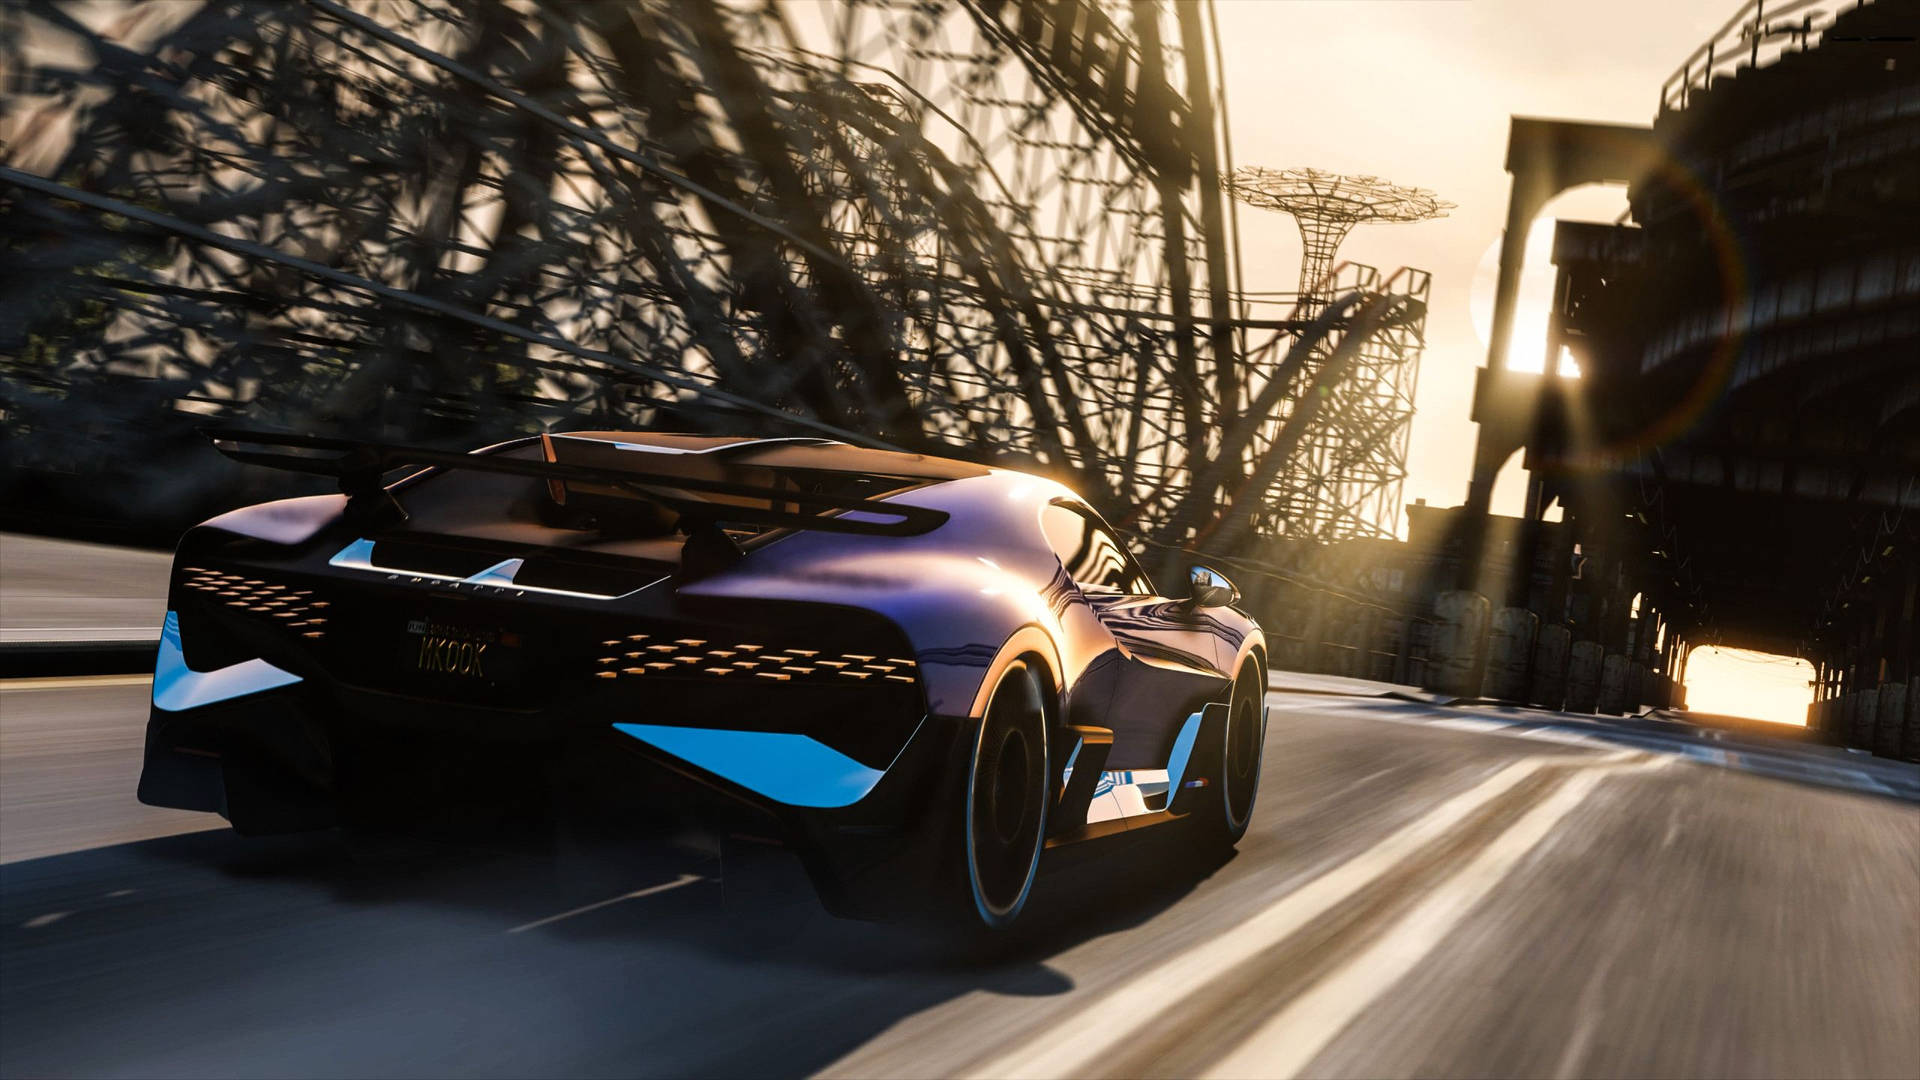 Gta 5 2560x1440 Violet Chiron Highway Picture